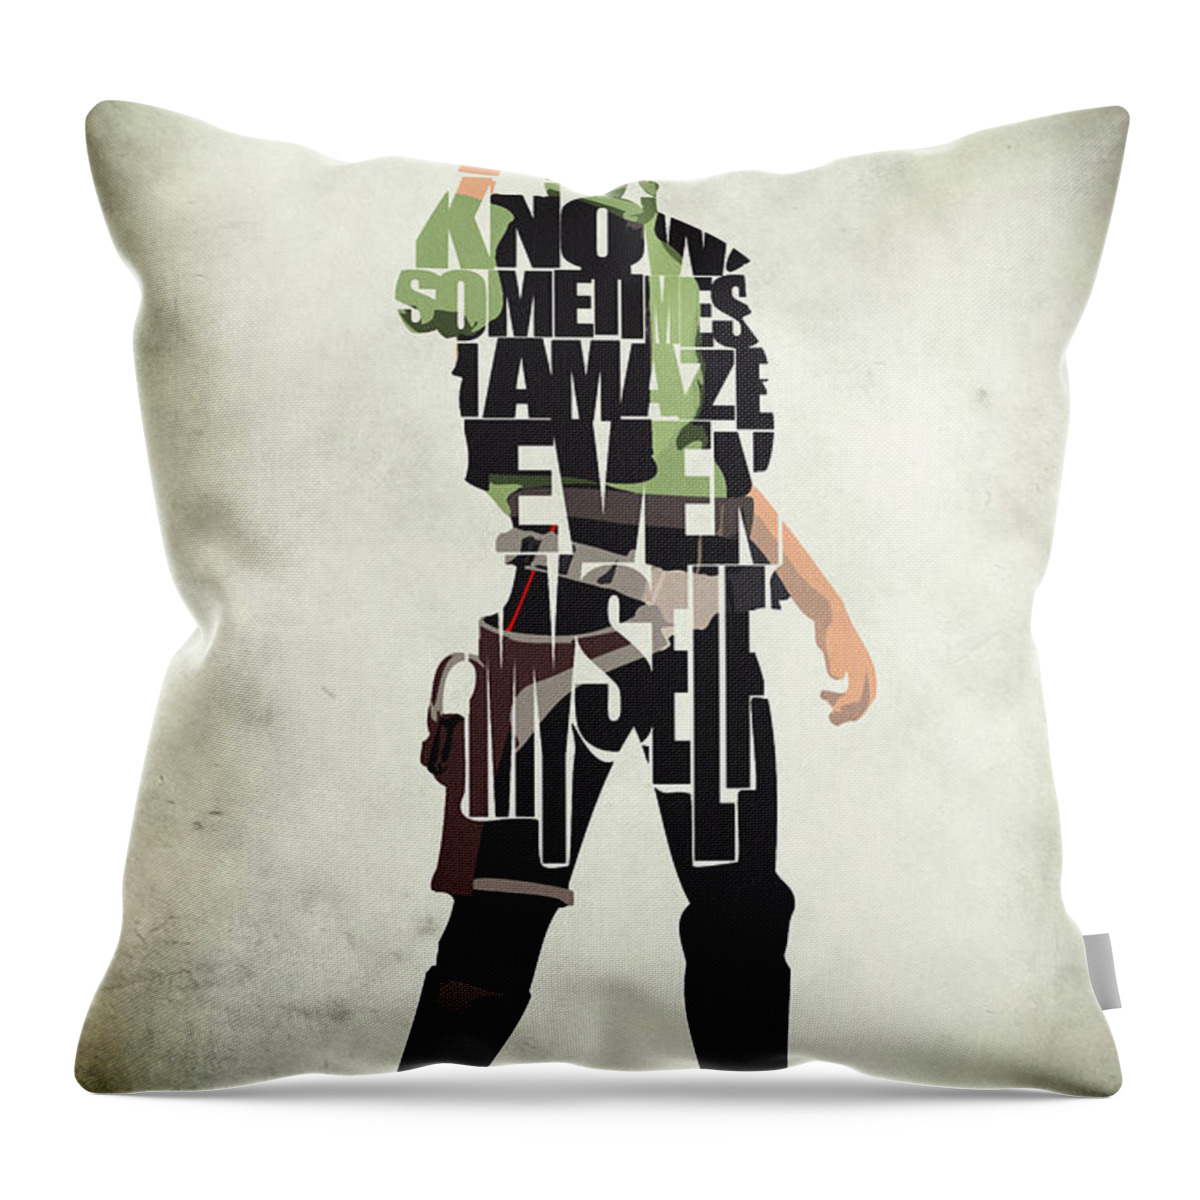 Han Solo Throw Pillow featuring the painting Han Solo Vol 2 - Star Wars by Inspirowl Design